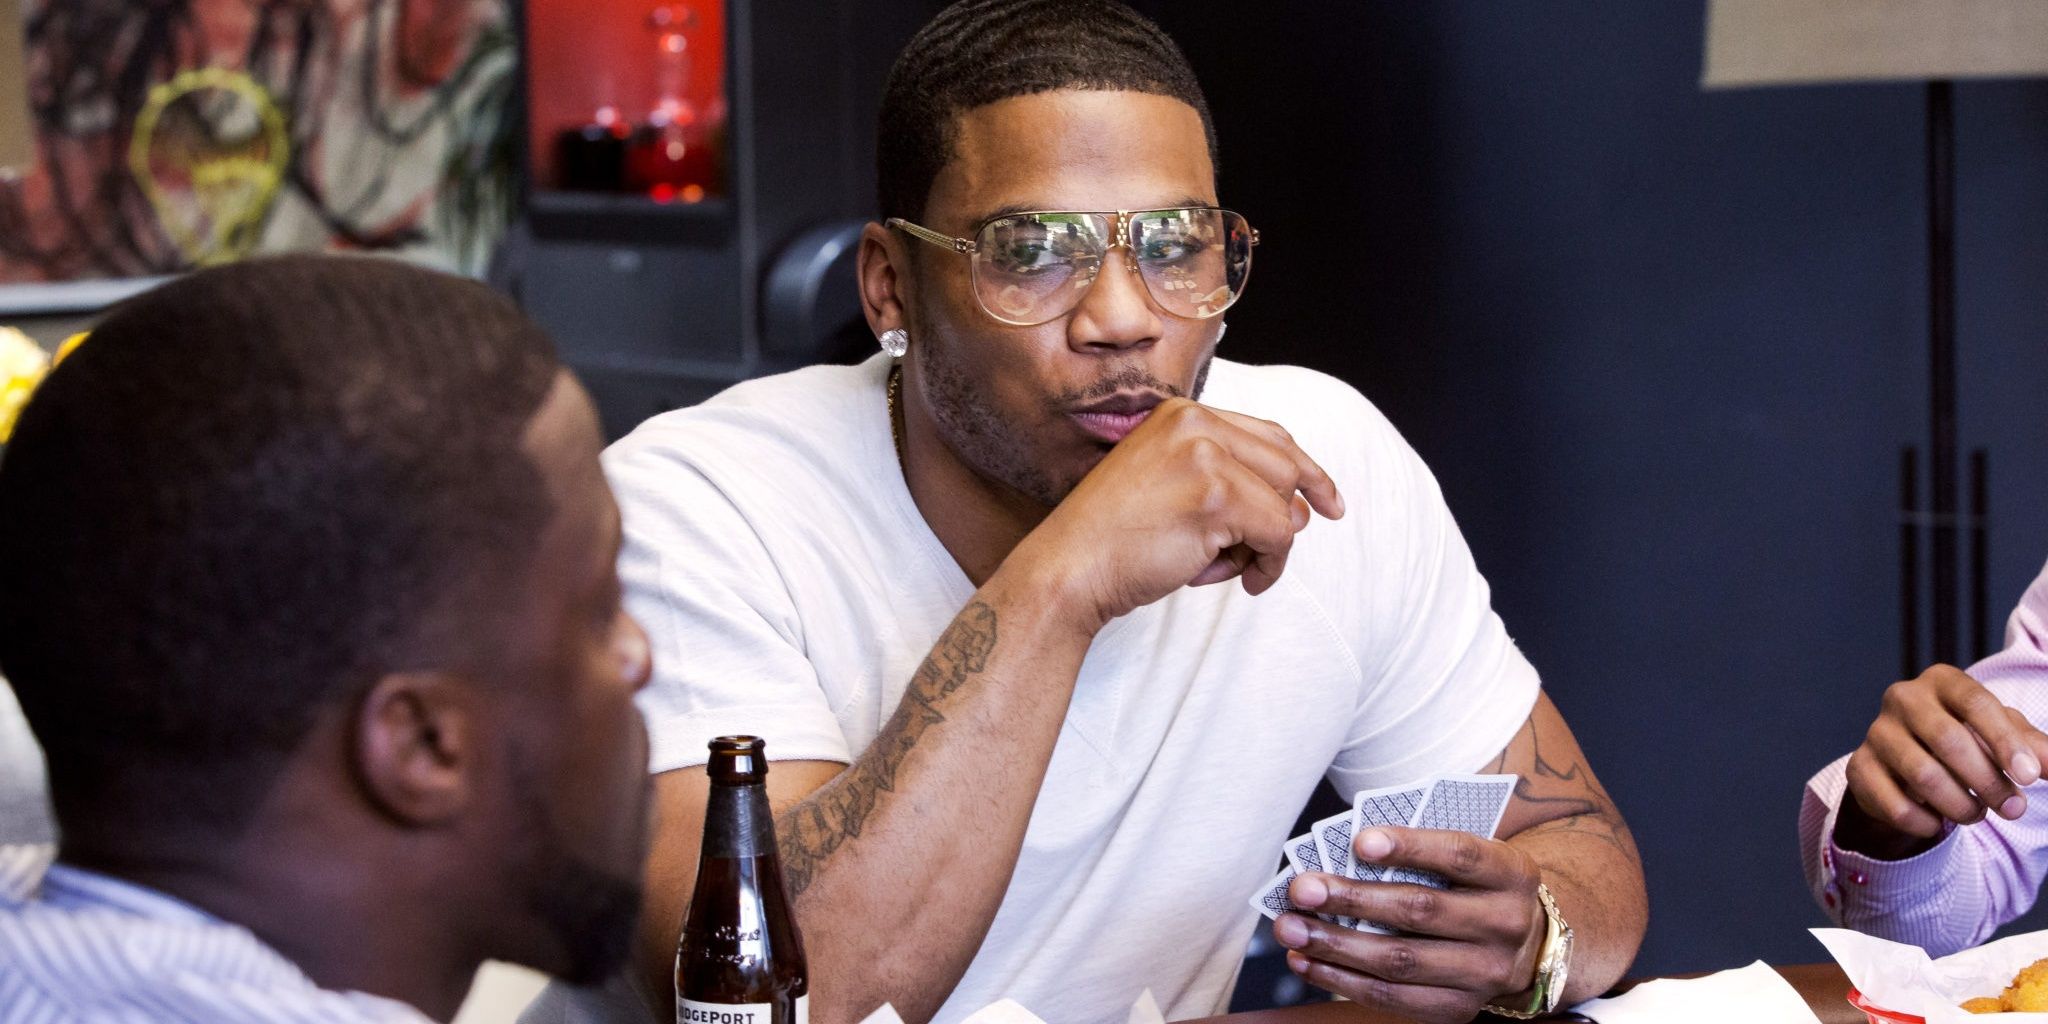 Nelly plays poker with Kevin in Real Husbands Of Hollywood